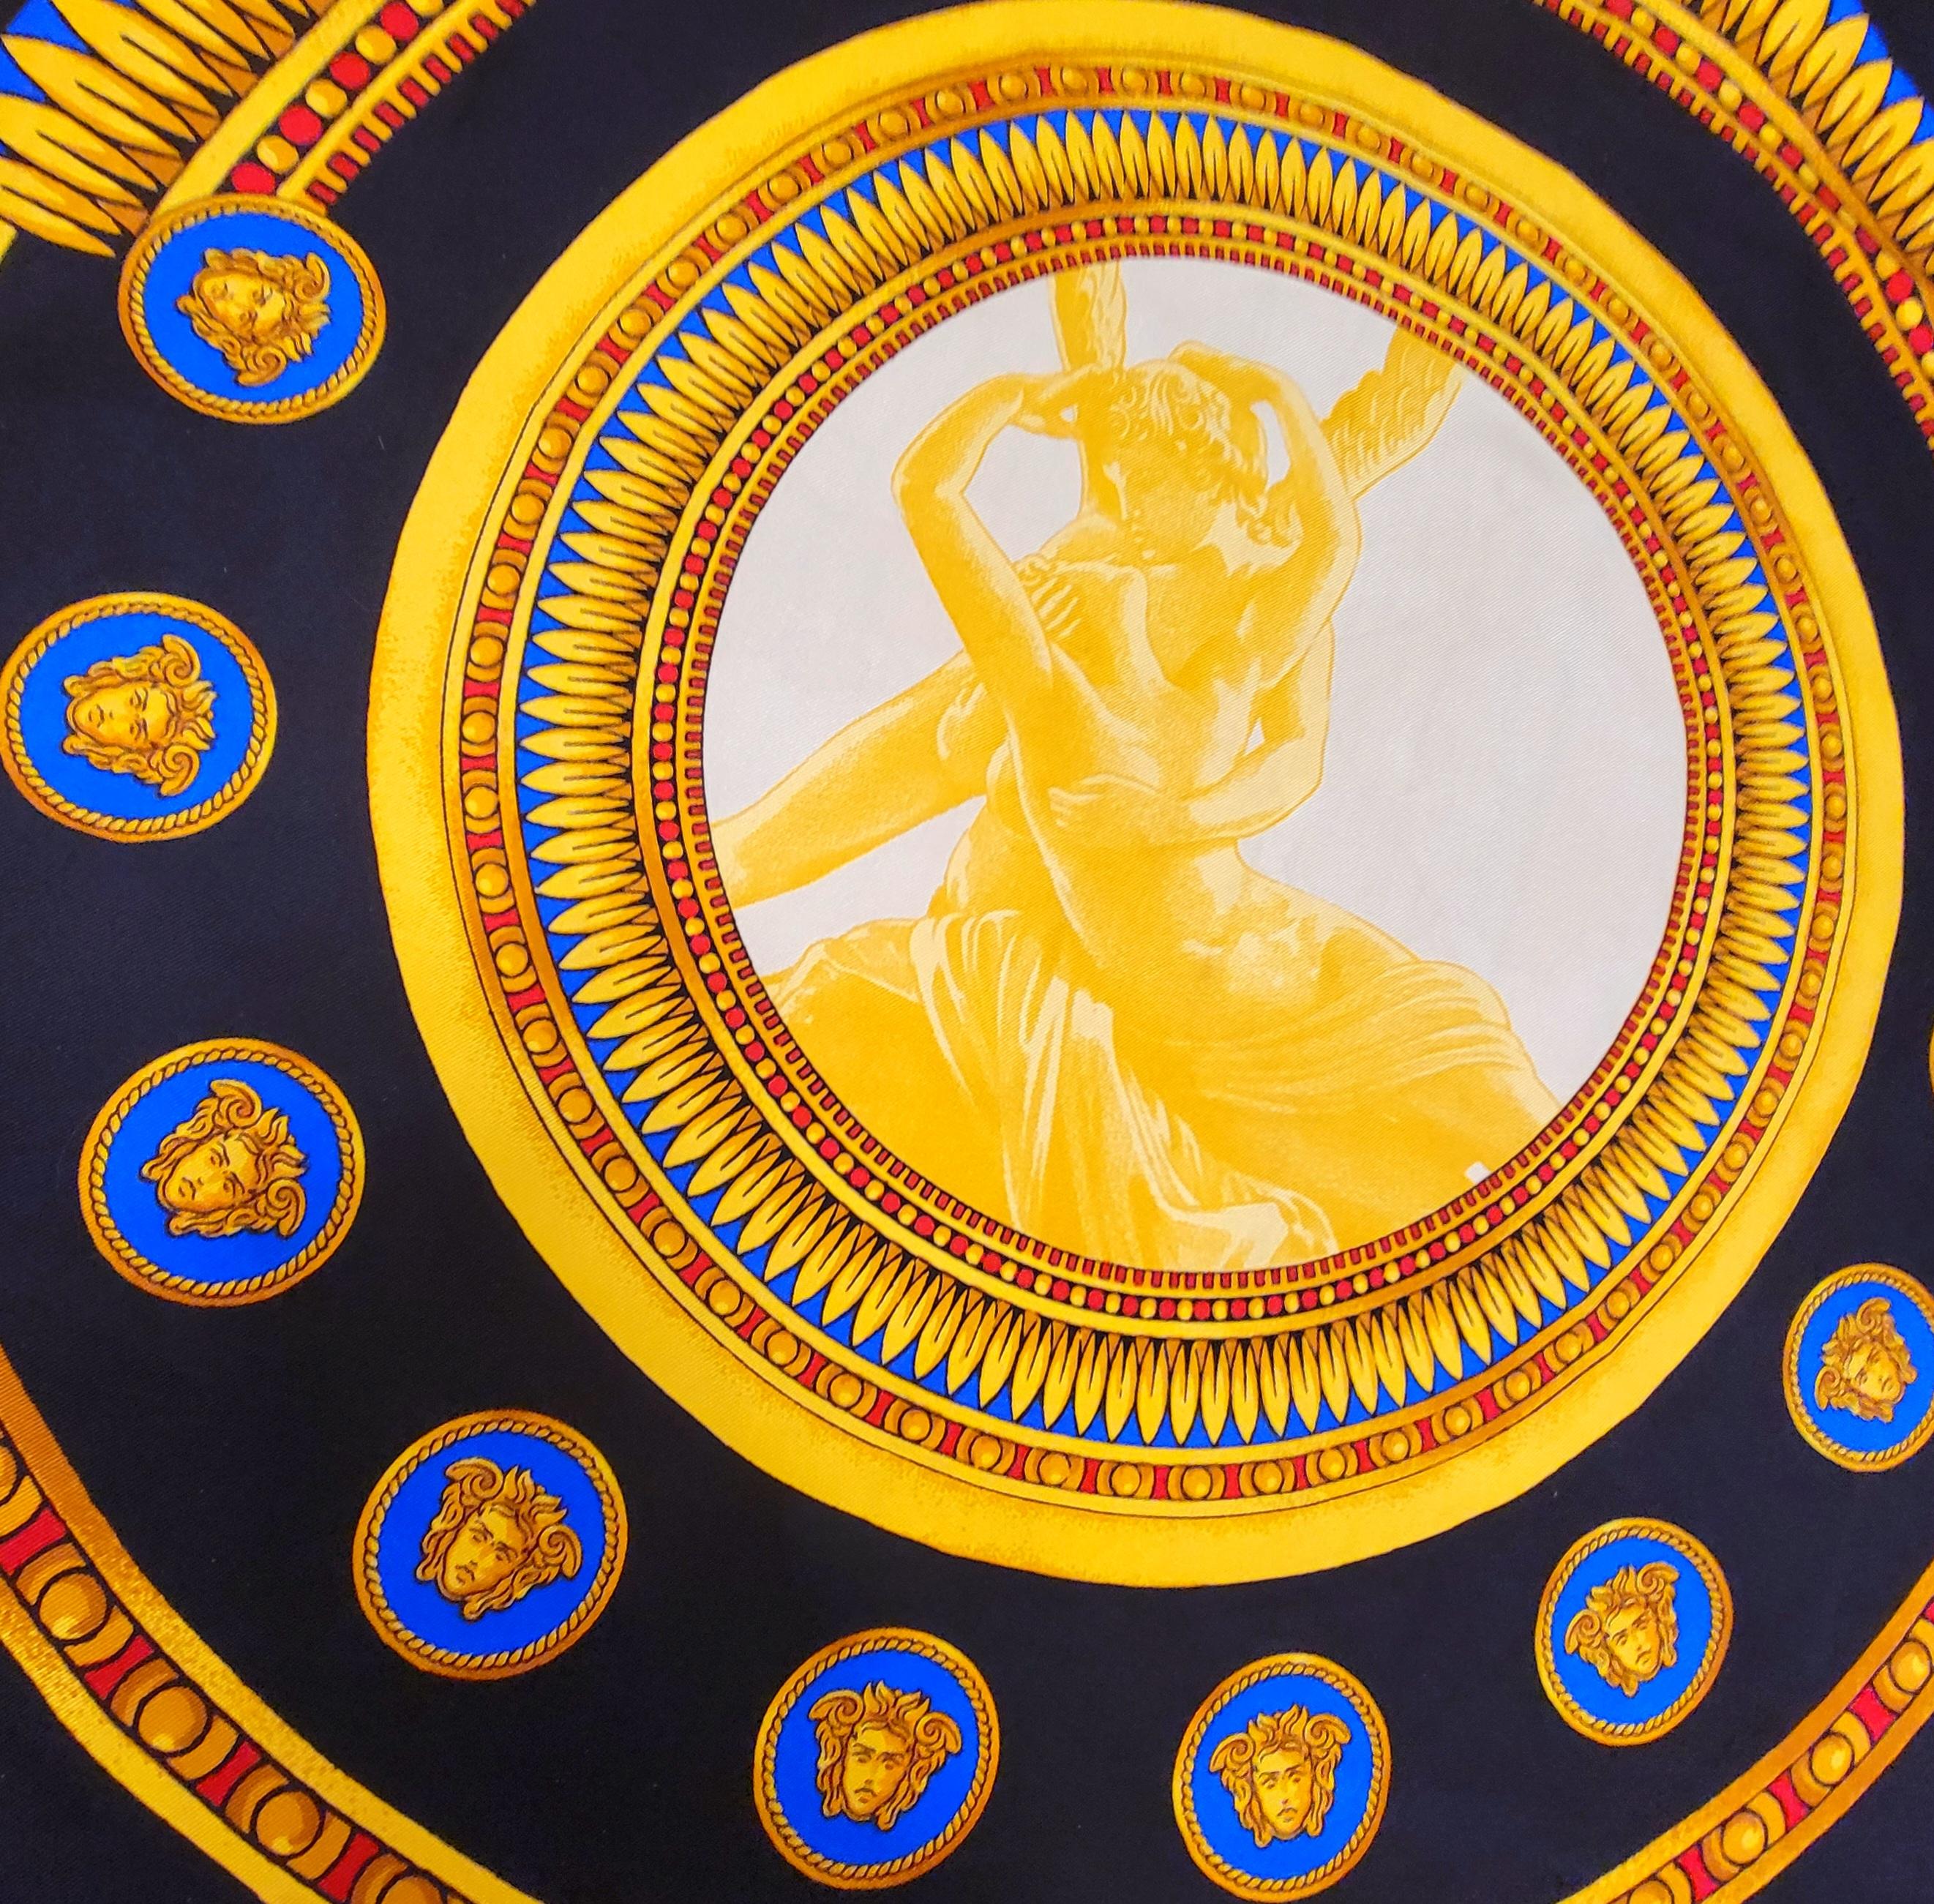 Gianni Versace Atelier Silk Scarf Vintage from the early 1990's with greek mythology baroque designs of the “Amore e Psiche” print based on Cupid sculpture and surrounded by a border of Medusa heads.

Size: 26